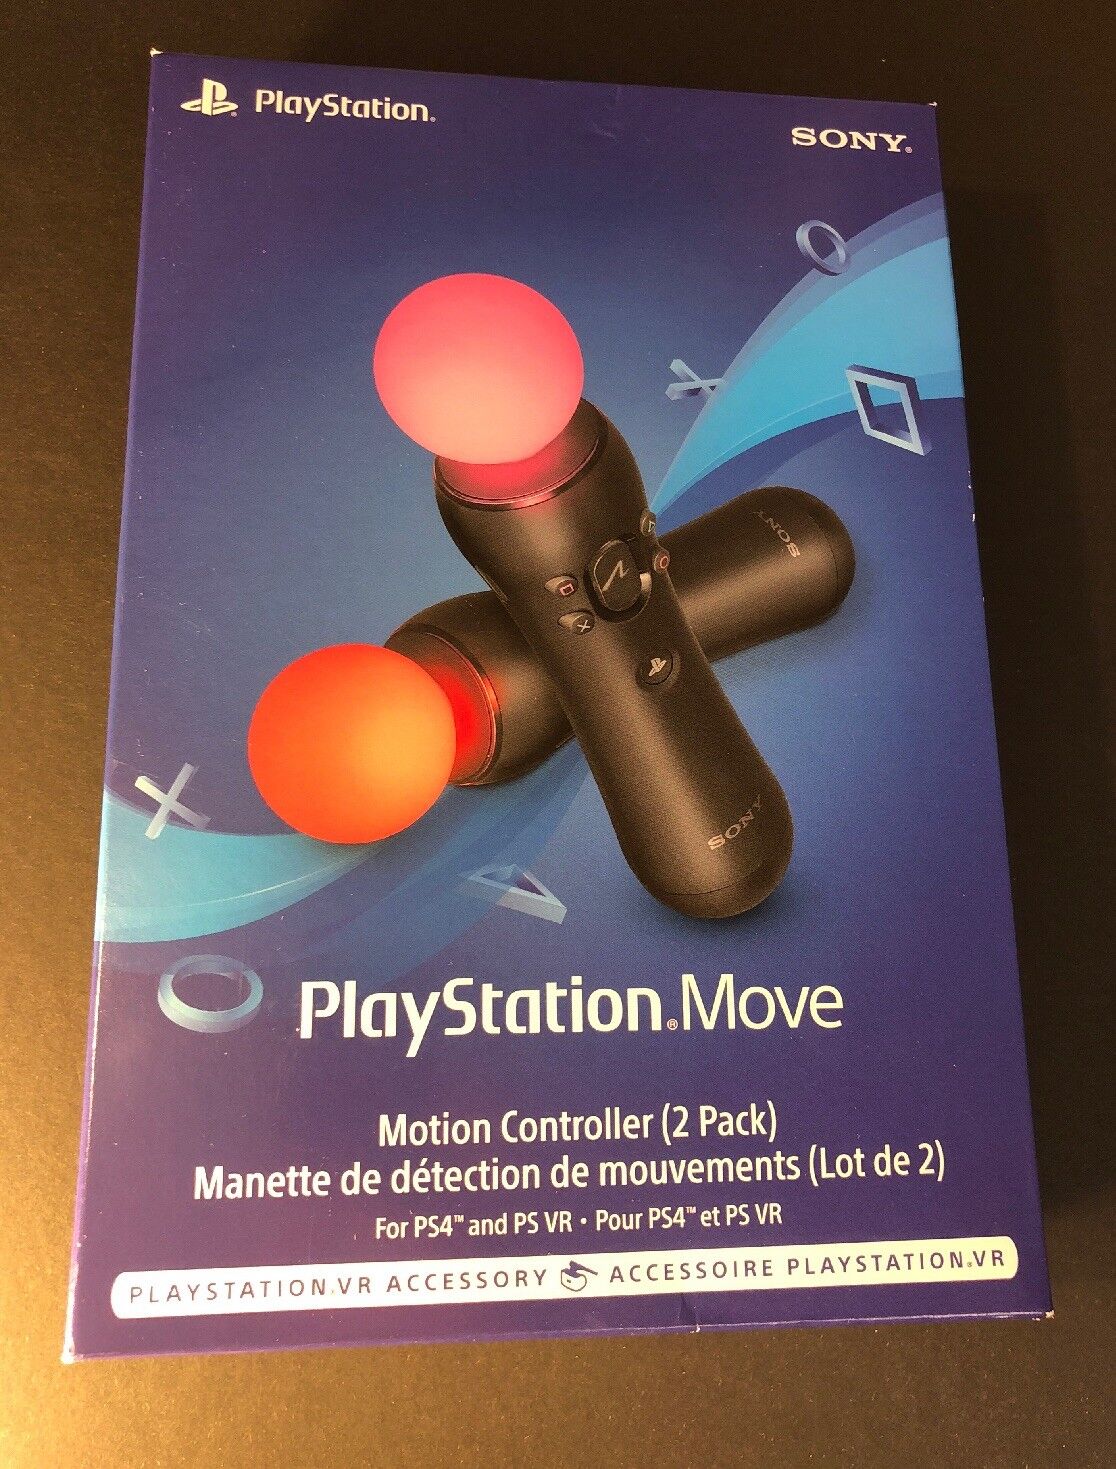 Official Sony PlayStation Move Motion Controller [ 2 Pack ] / PSVR) NEW 711719504993 eBay